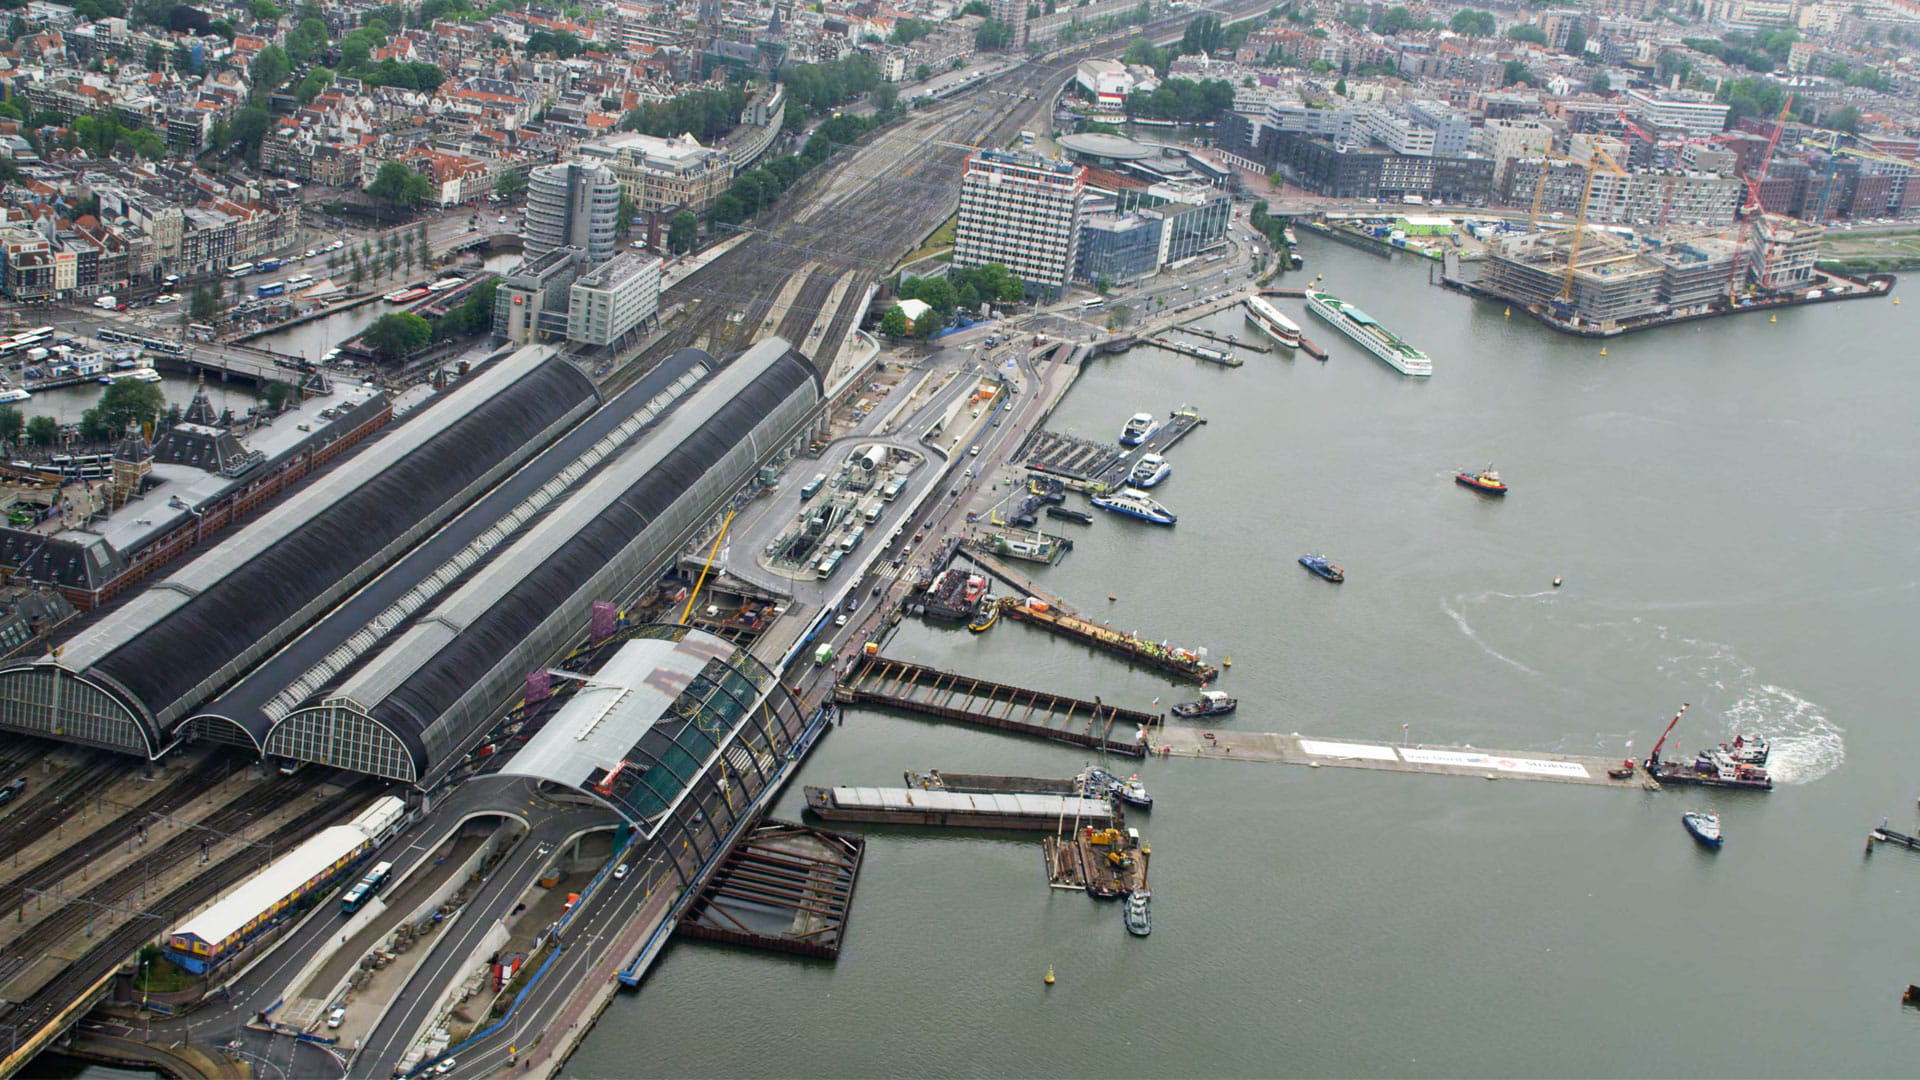 bird eye view of Amsterdam station showing construction in the water